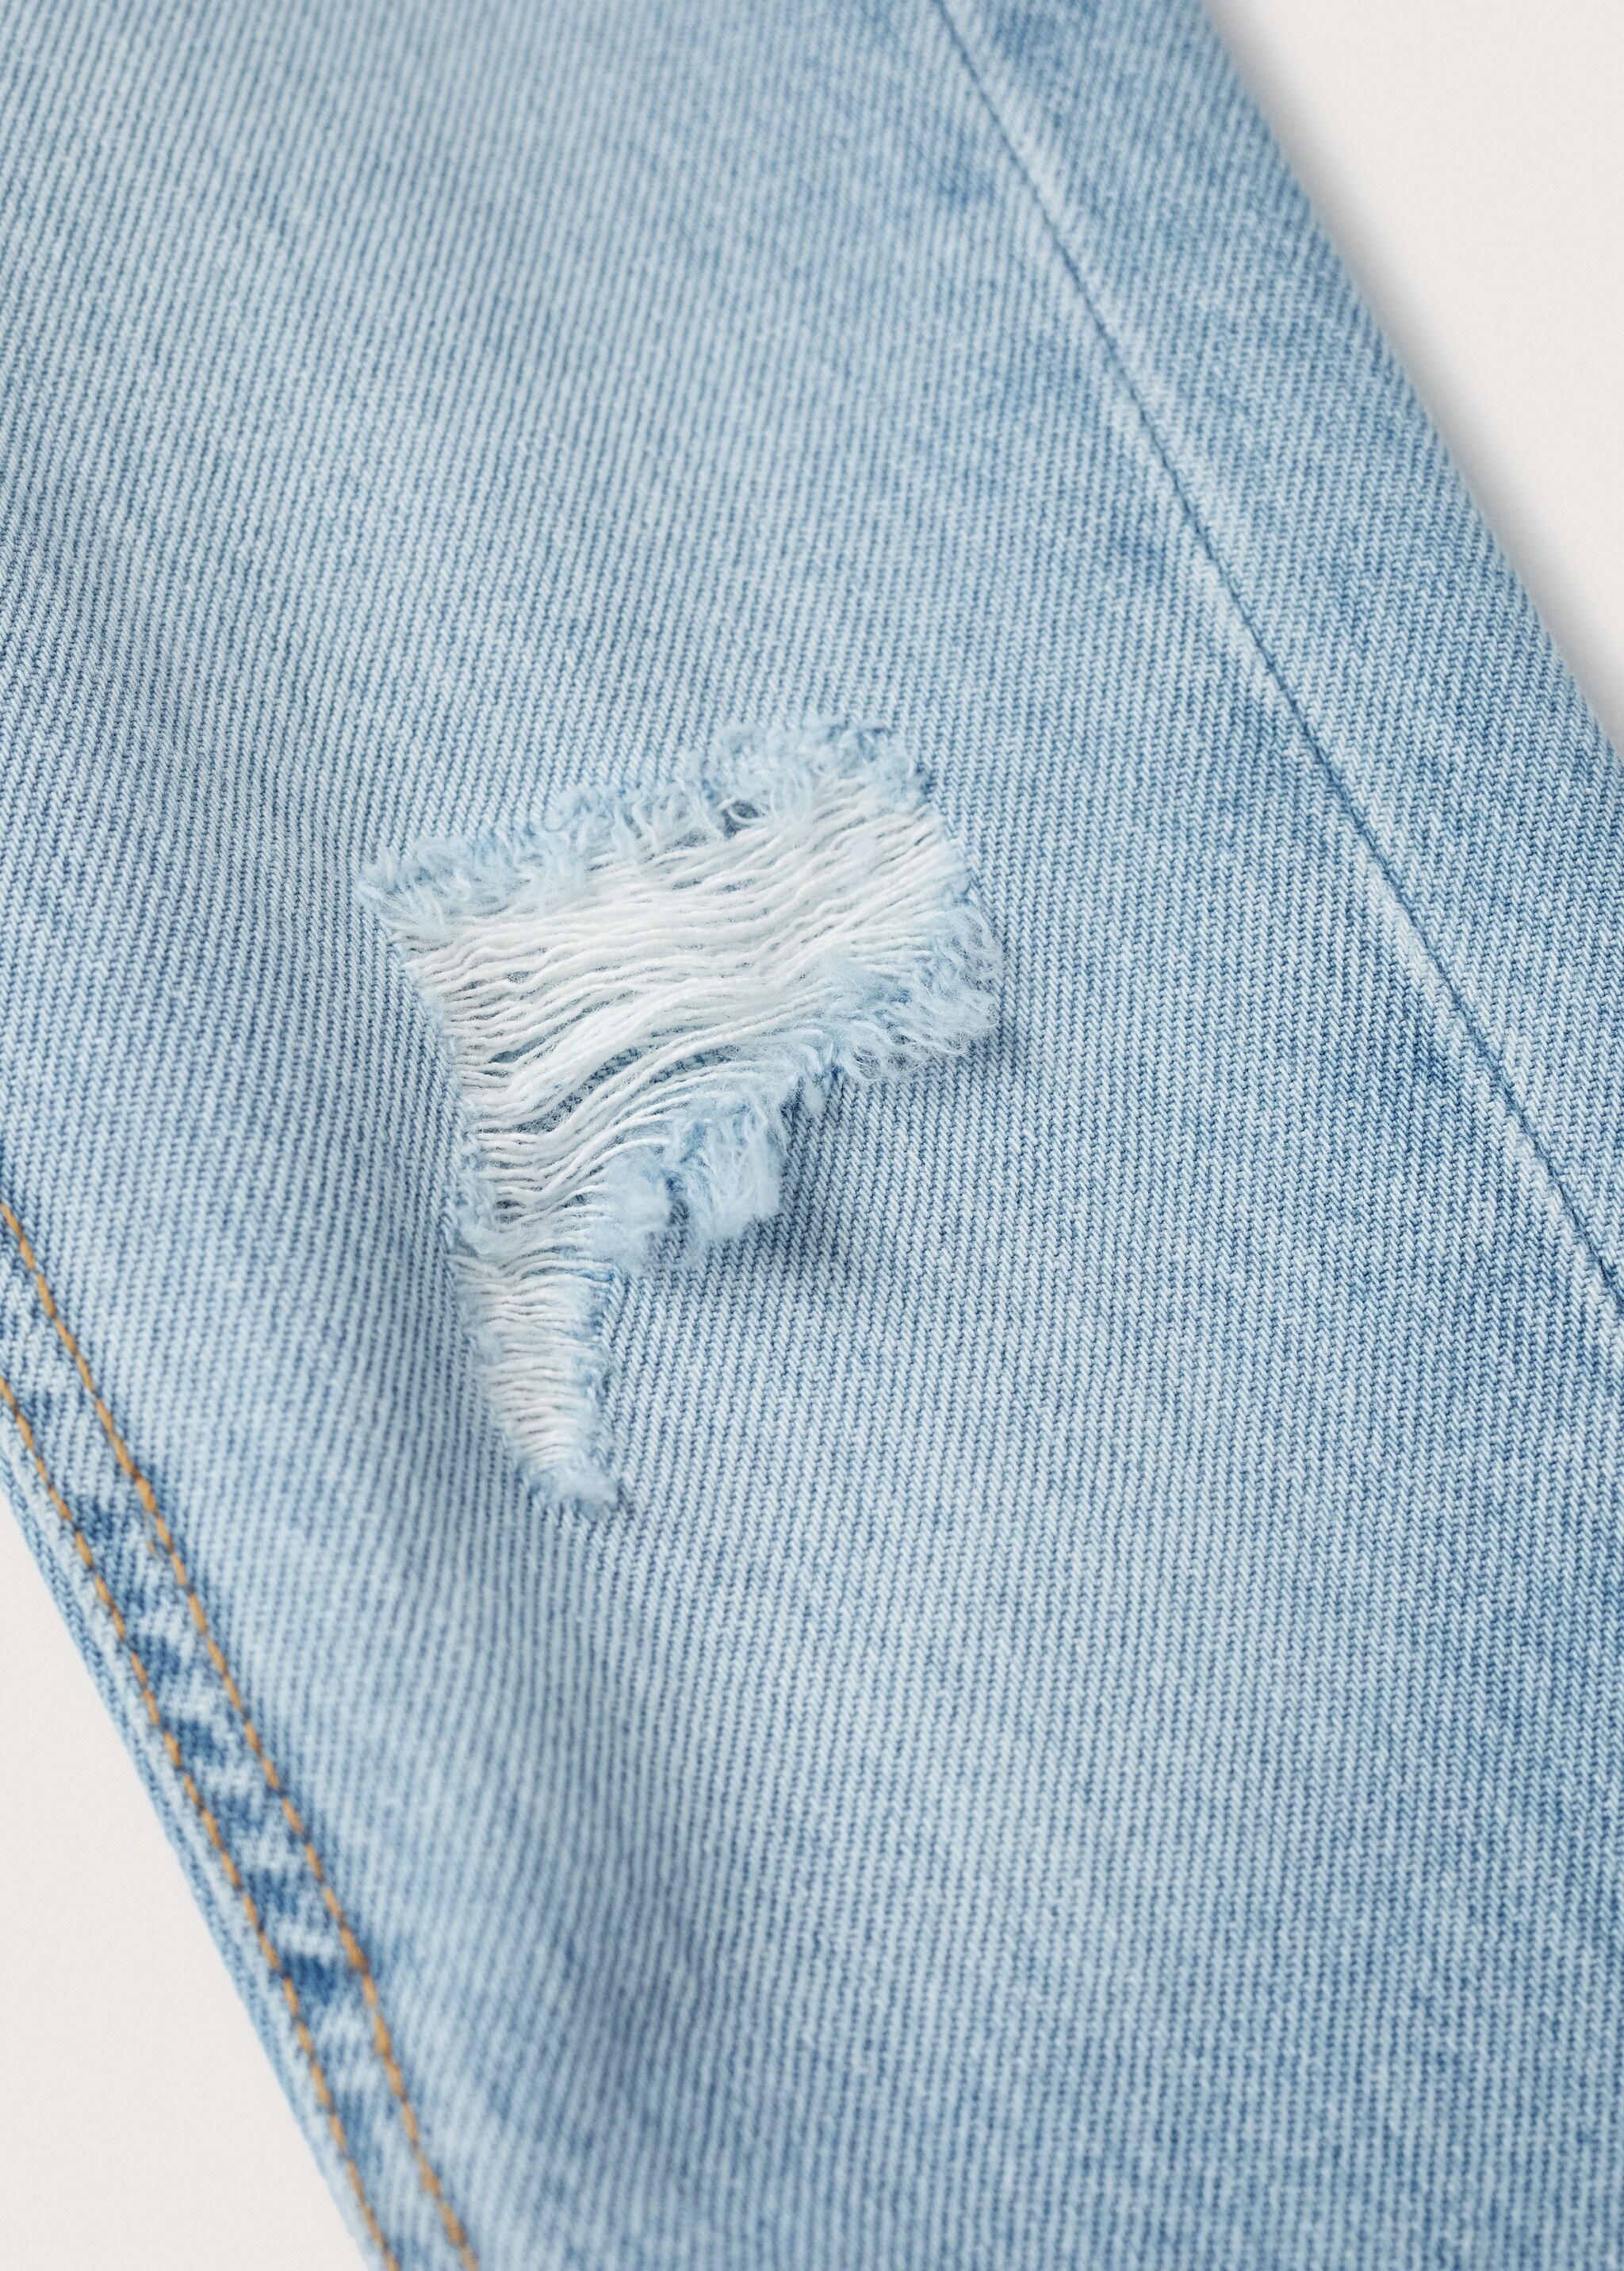 Decorative ripped regular jeans - Details of the article 8